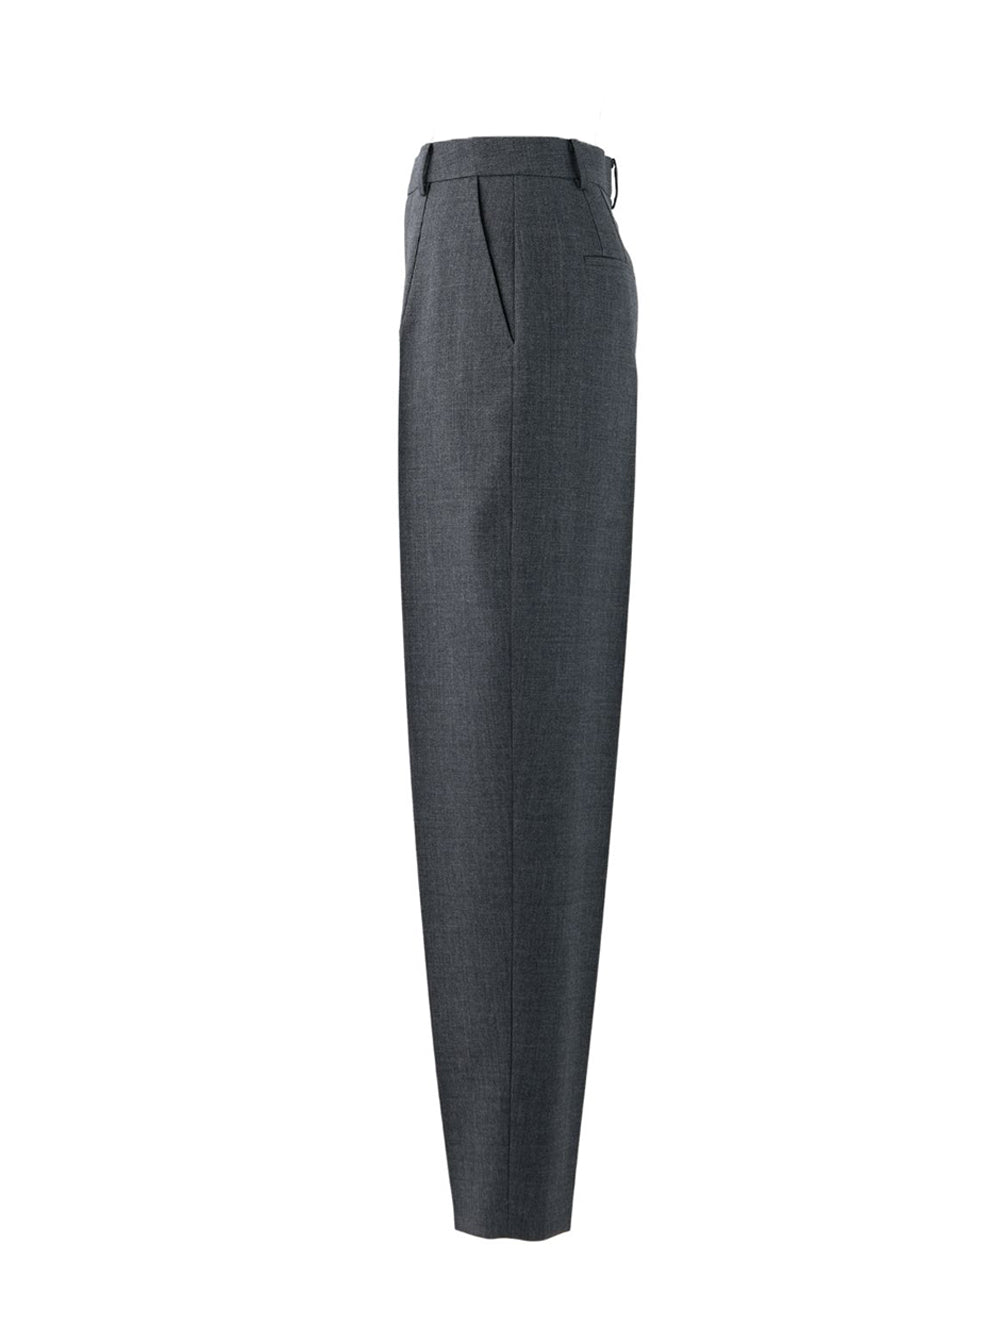 Wool Tapered Trouser (Charcoal Gray)